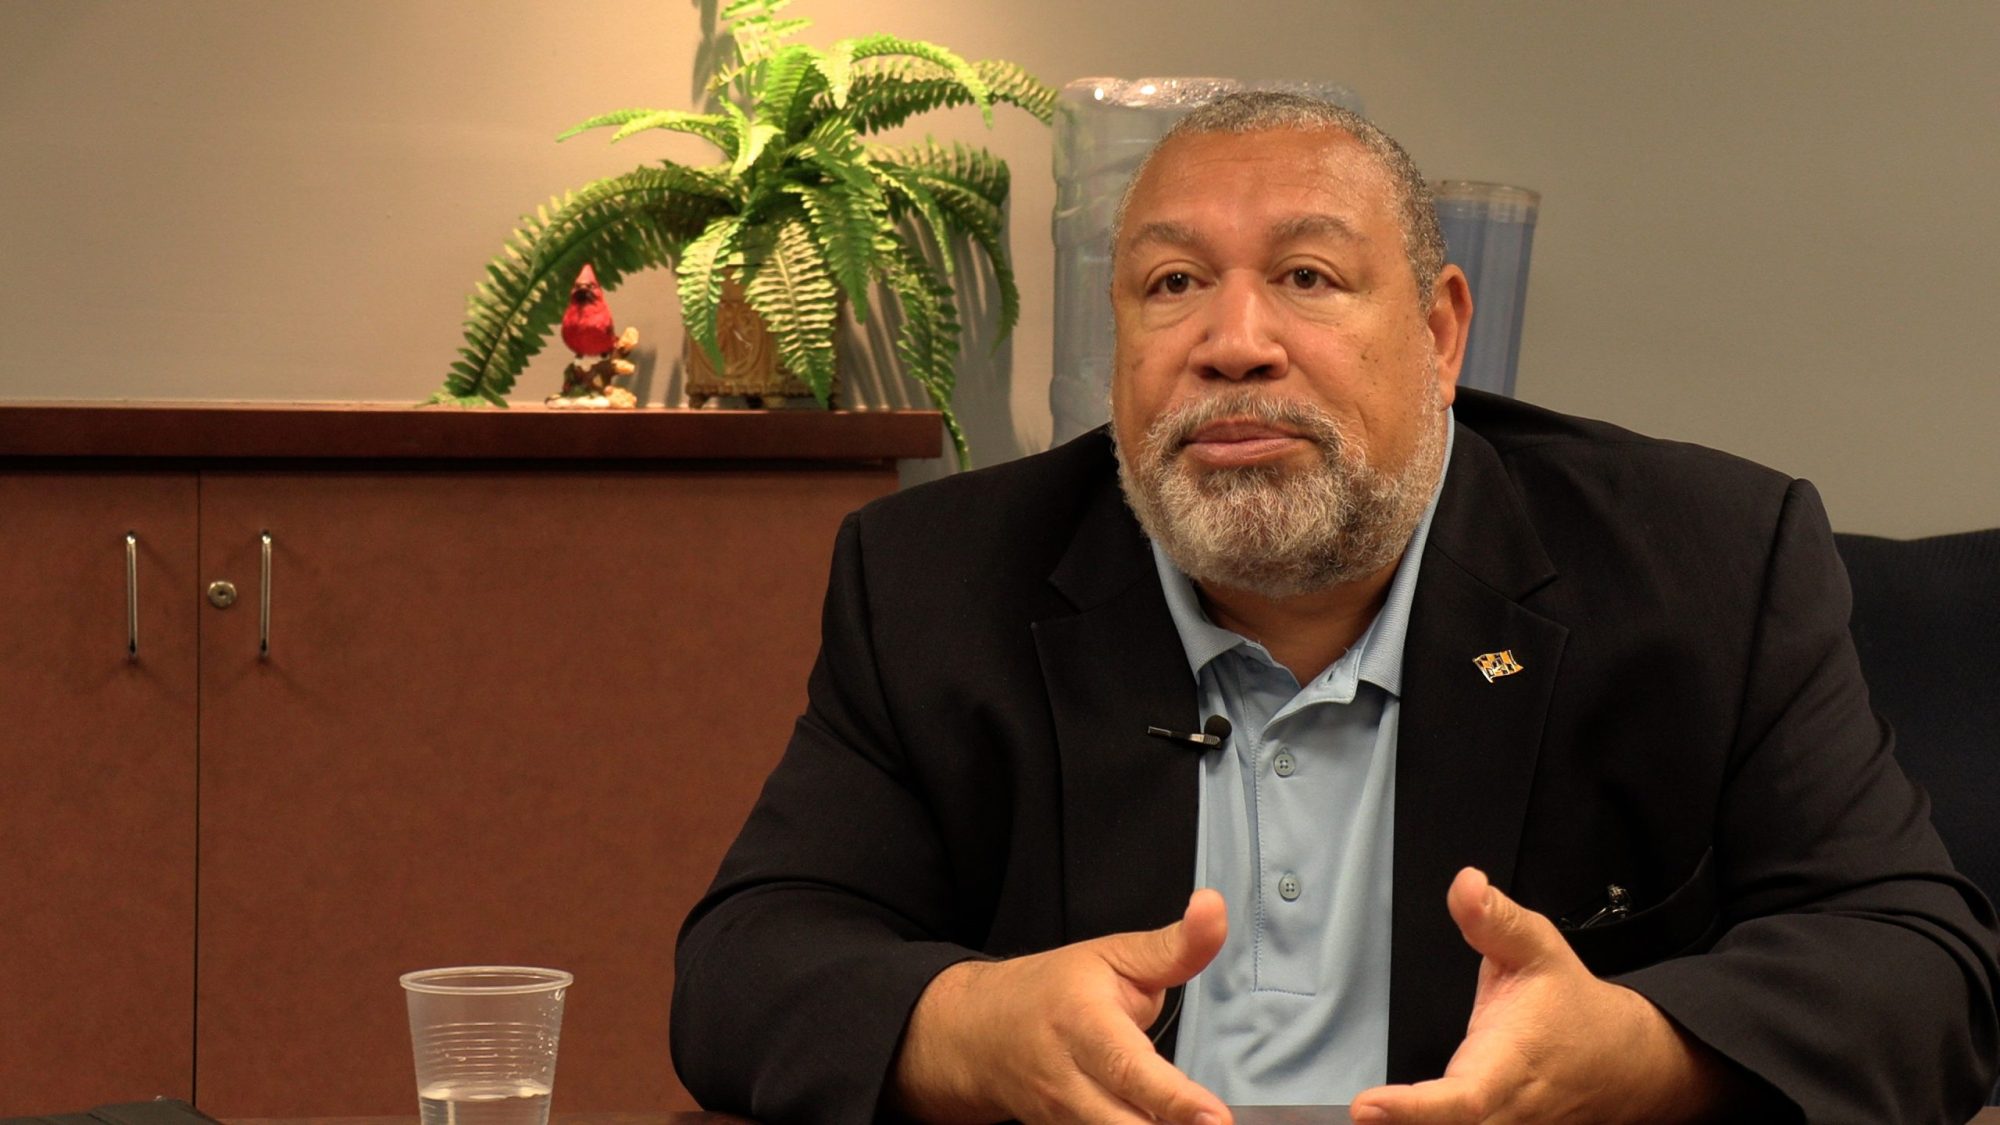 Bill Henry sits at a desk and explains something during an interview. He is an older Black man with a light beard, wearing a dark suit and button up shirt with no tie.